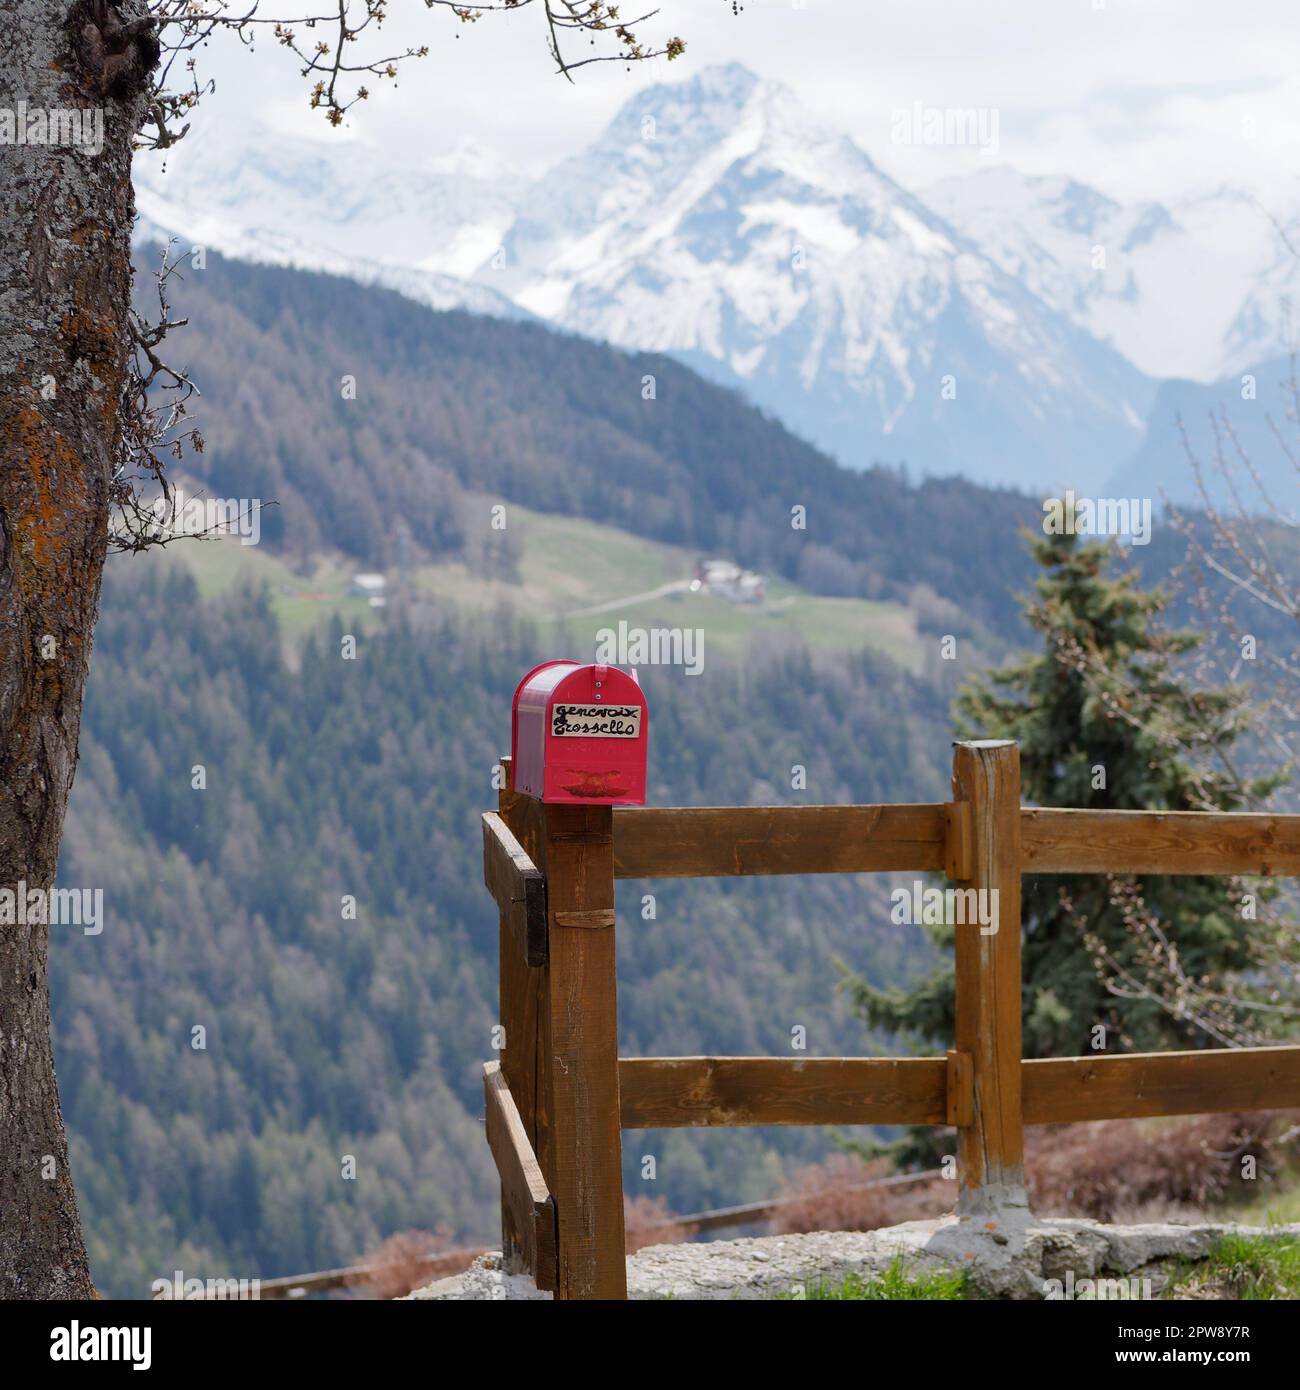 Red post box on a wooden fence in the alpine town of Lignan in the Aosta Vally, NW Italy Stock Photo